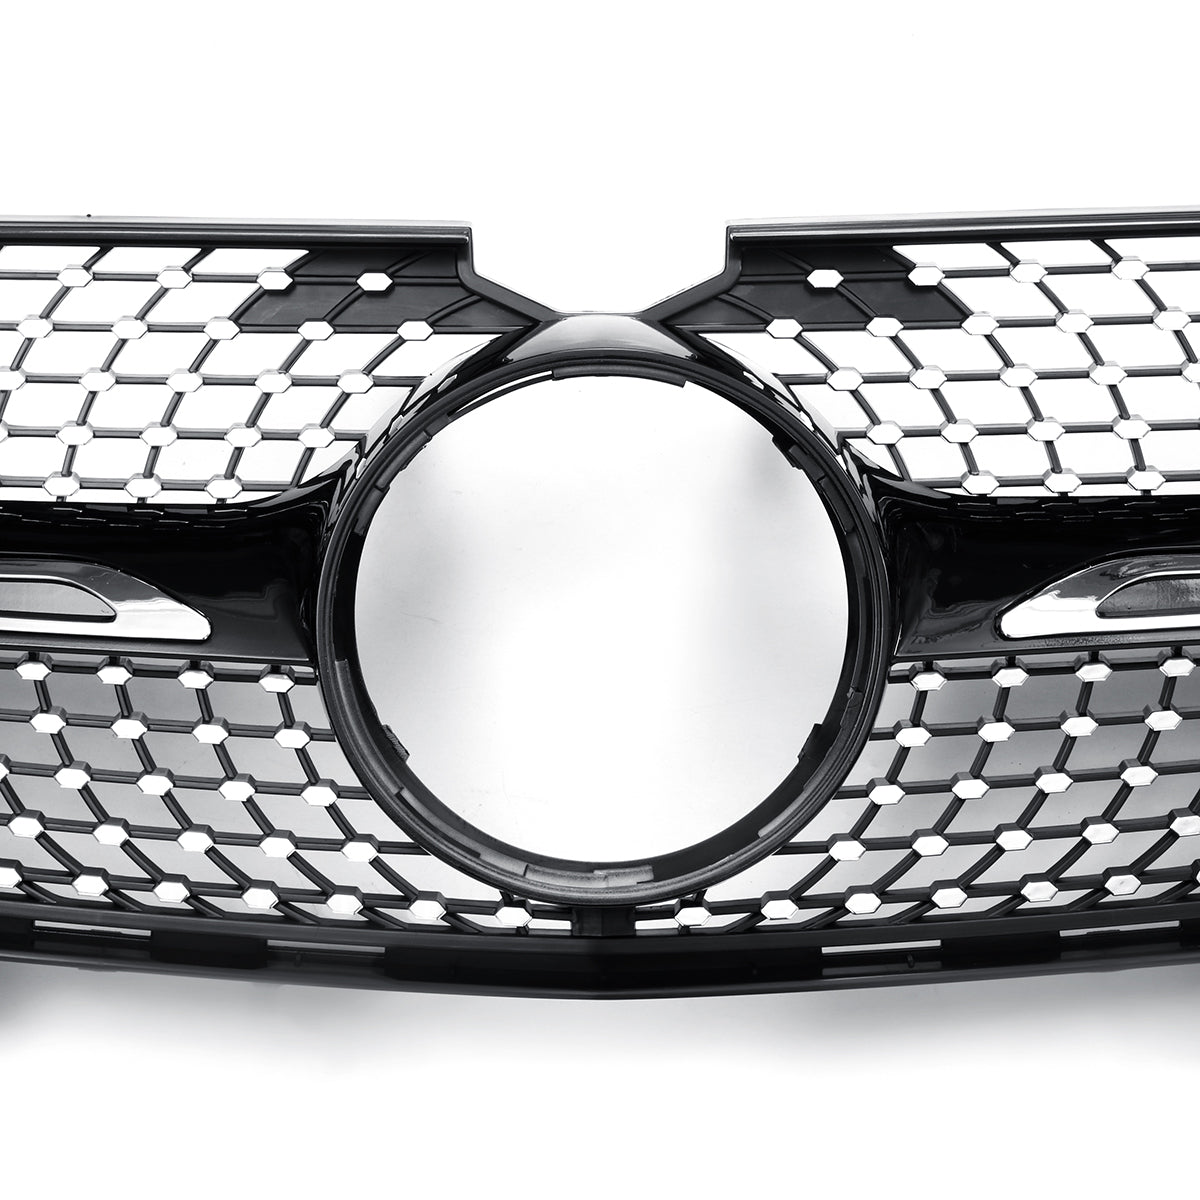 Lavender Black Diamond Style Front Grille Grill For Mercedes-Benz GL-Class X164 GL320/350/450